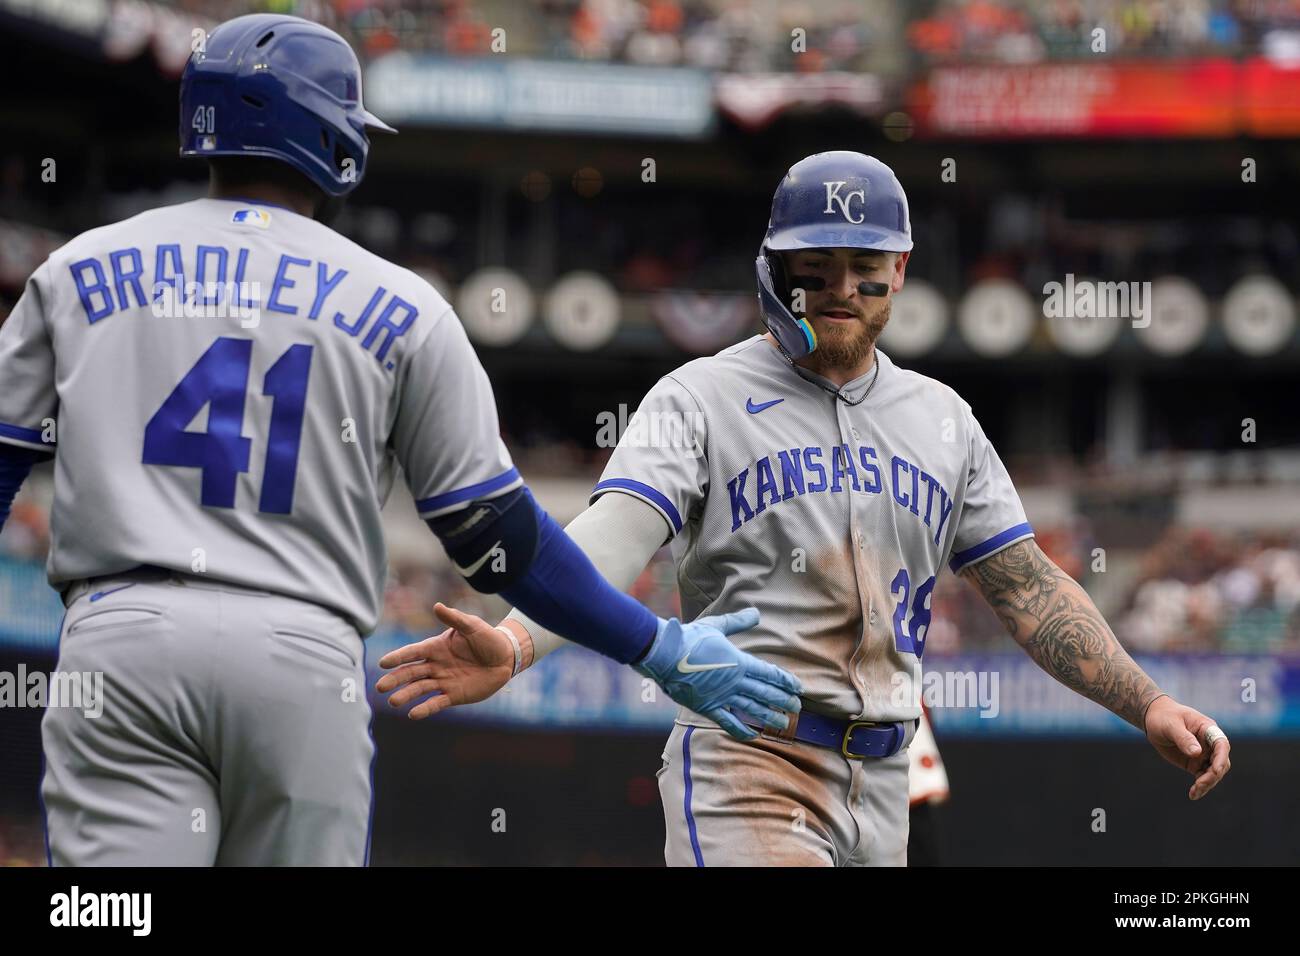 Kansas City Royals' Kyle Isbel, right, is congratulated by Jackie